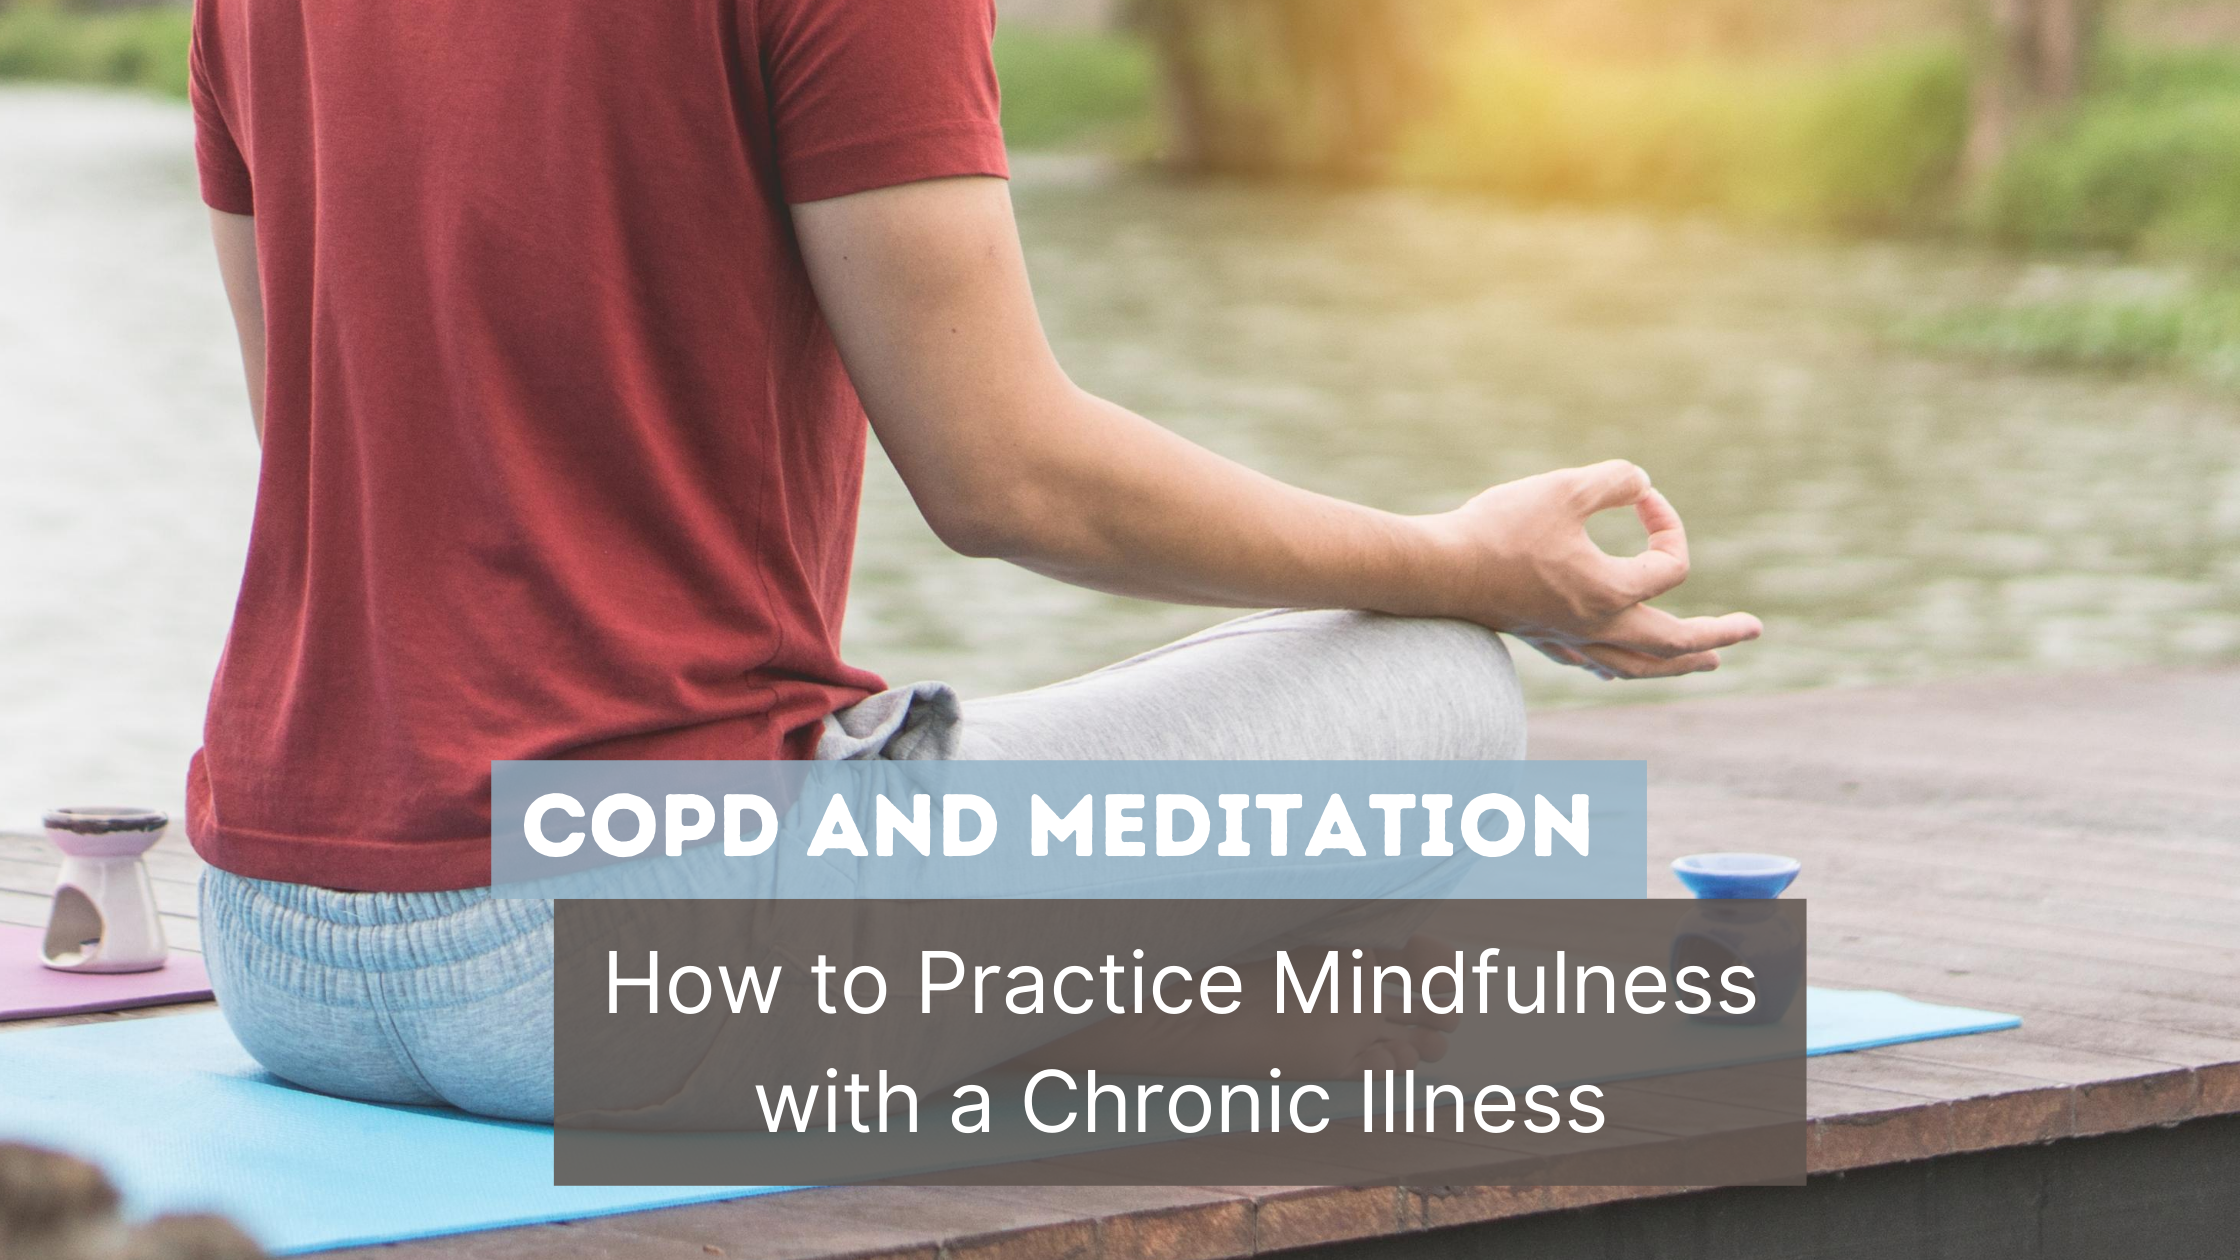 How to practice mindfulness with COPD